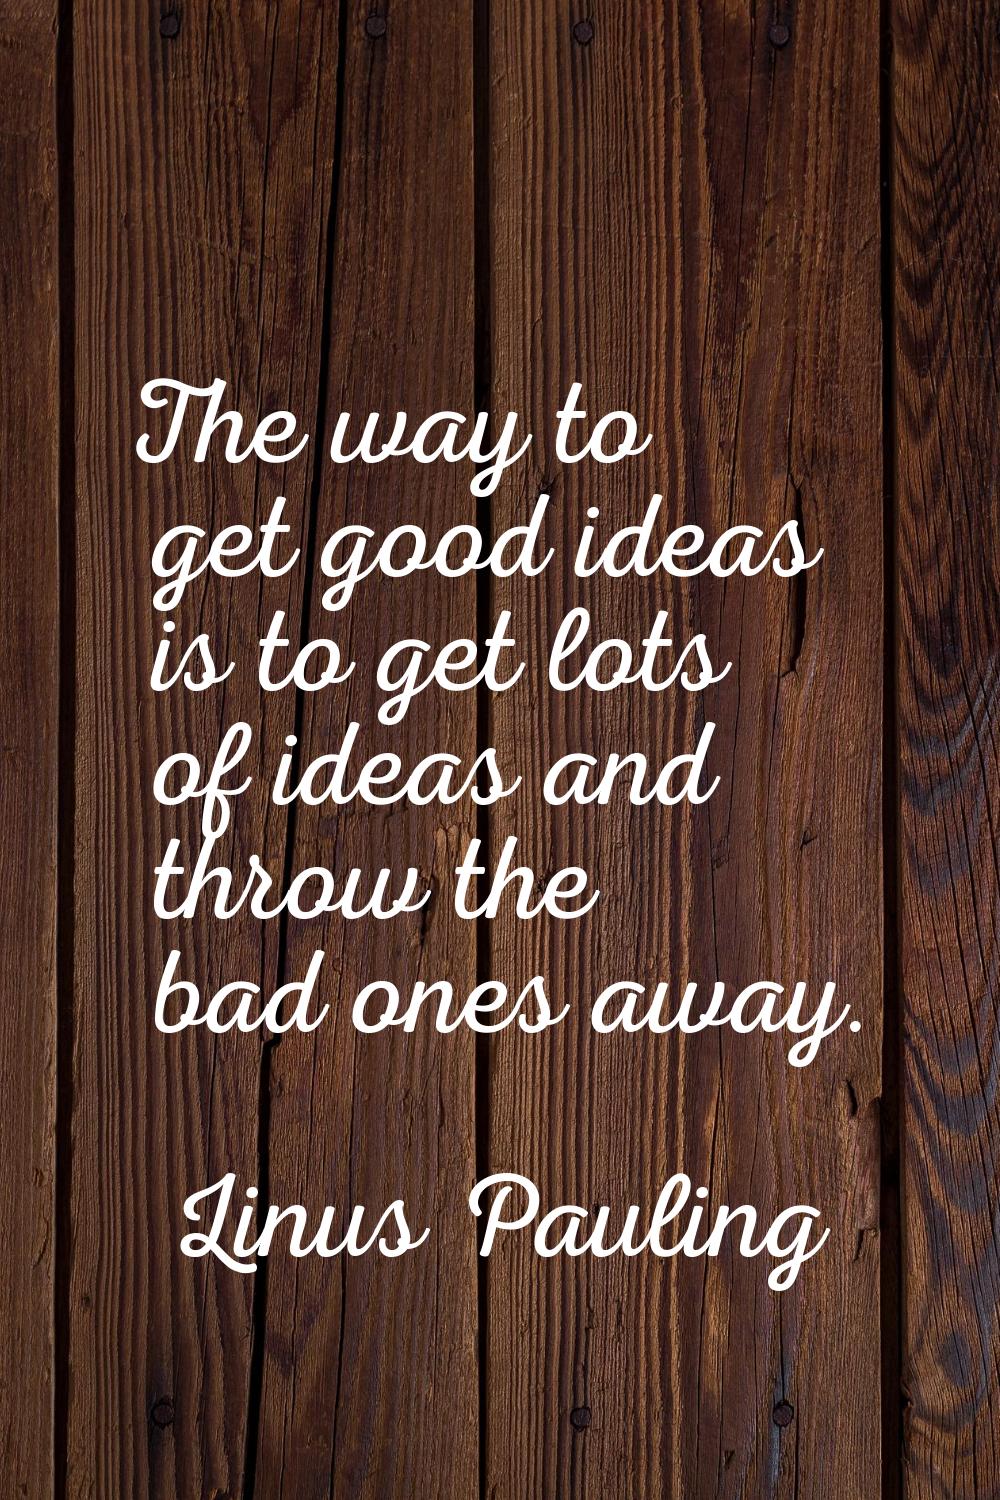 The way to get good ideas is to get lots of ideas and throw the bad ones away.